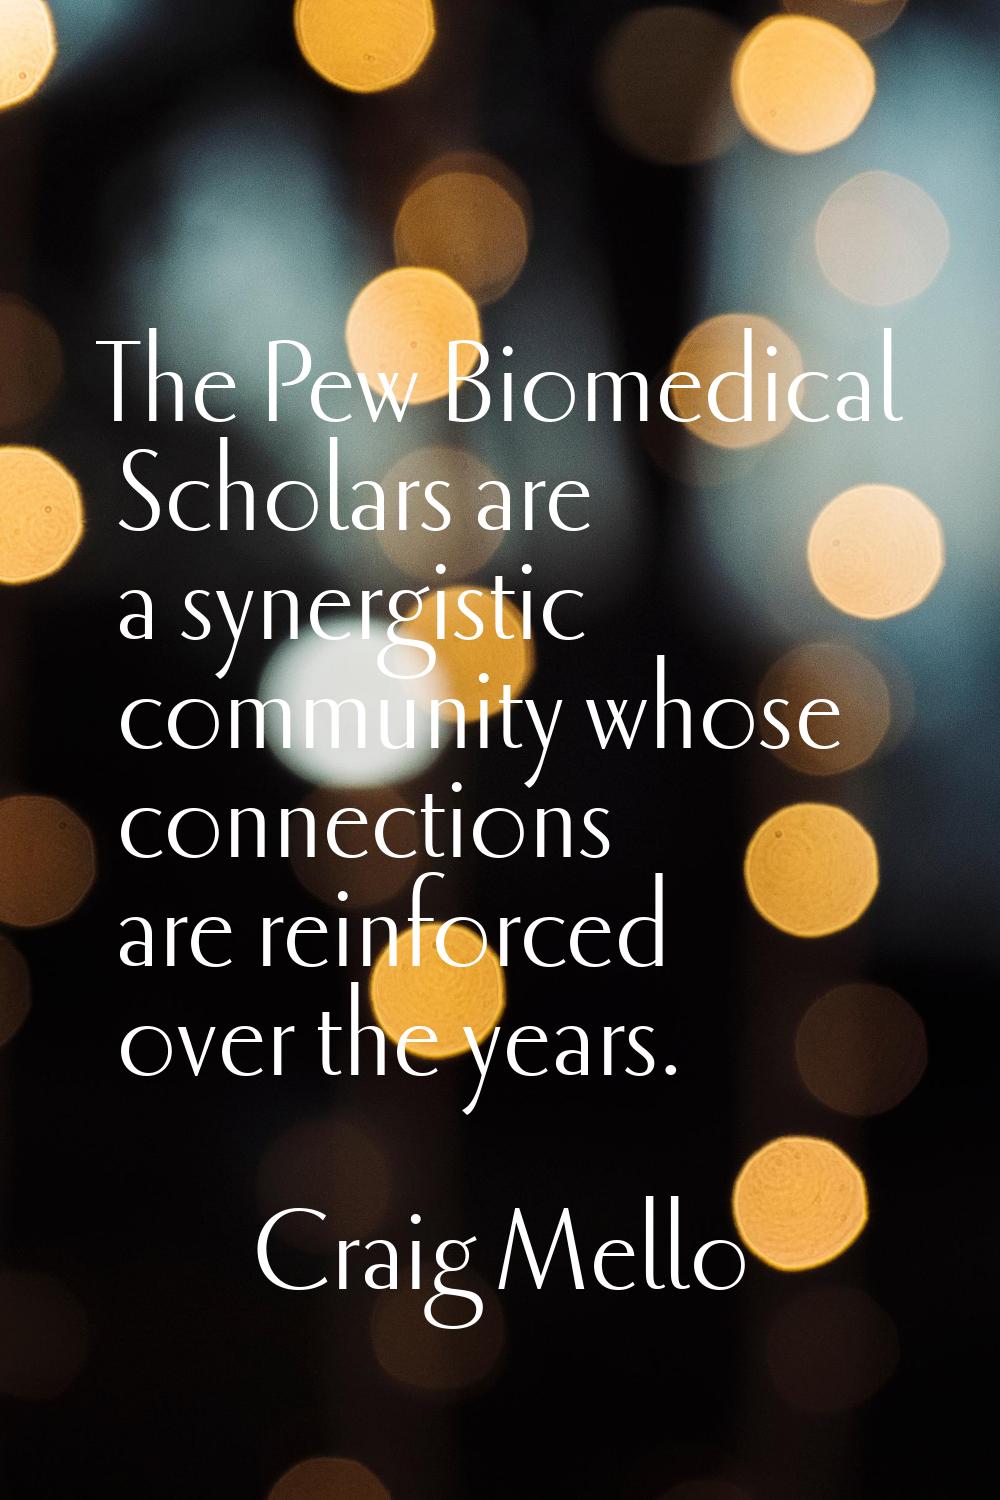 The Pew Biomedical Scholars are a synergistic community whose connections are reinforced over the y